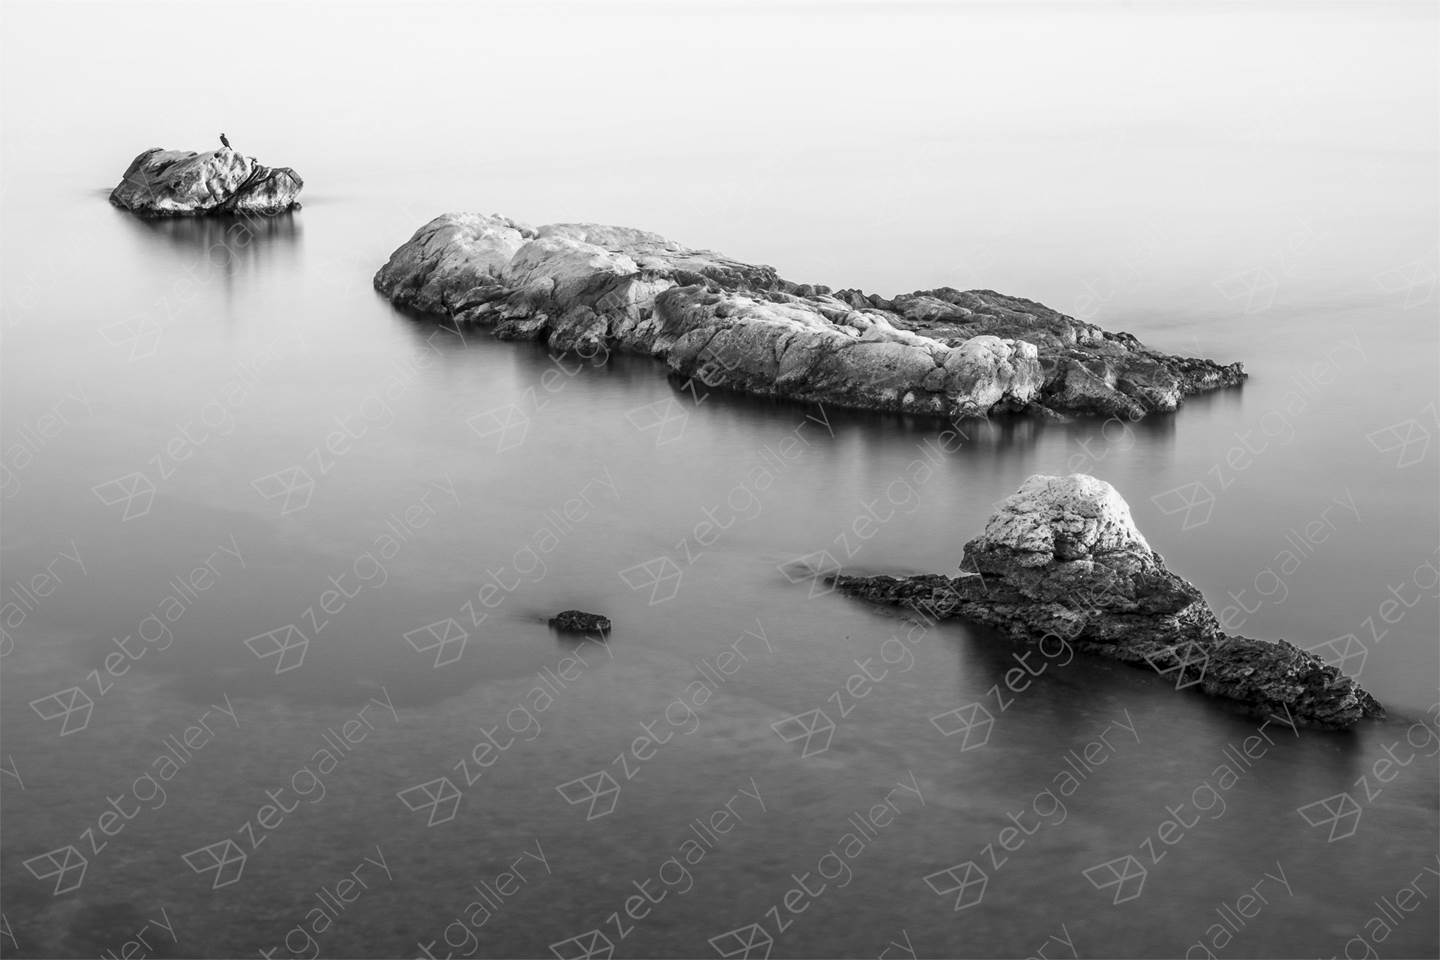 BIRD ON A ROCK II, Large Edition 1 of 5, original Abstract Digital Photography by Benjamin Lurie